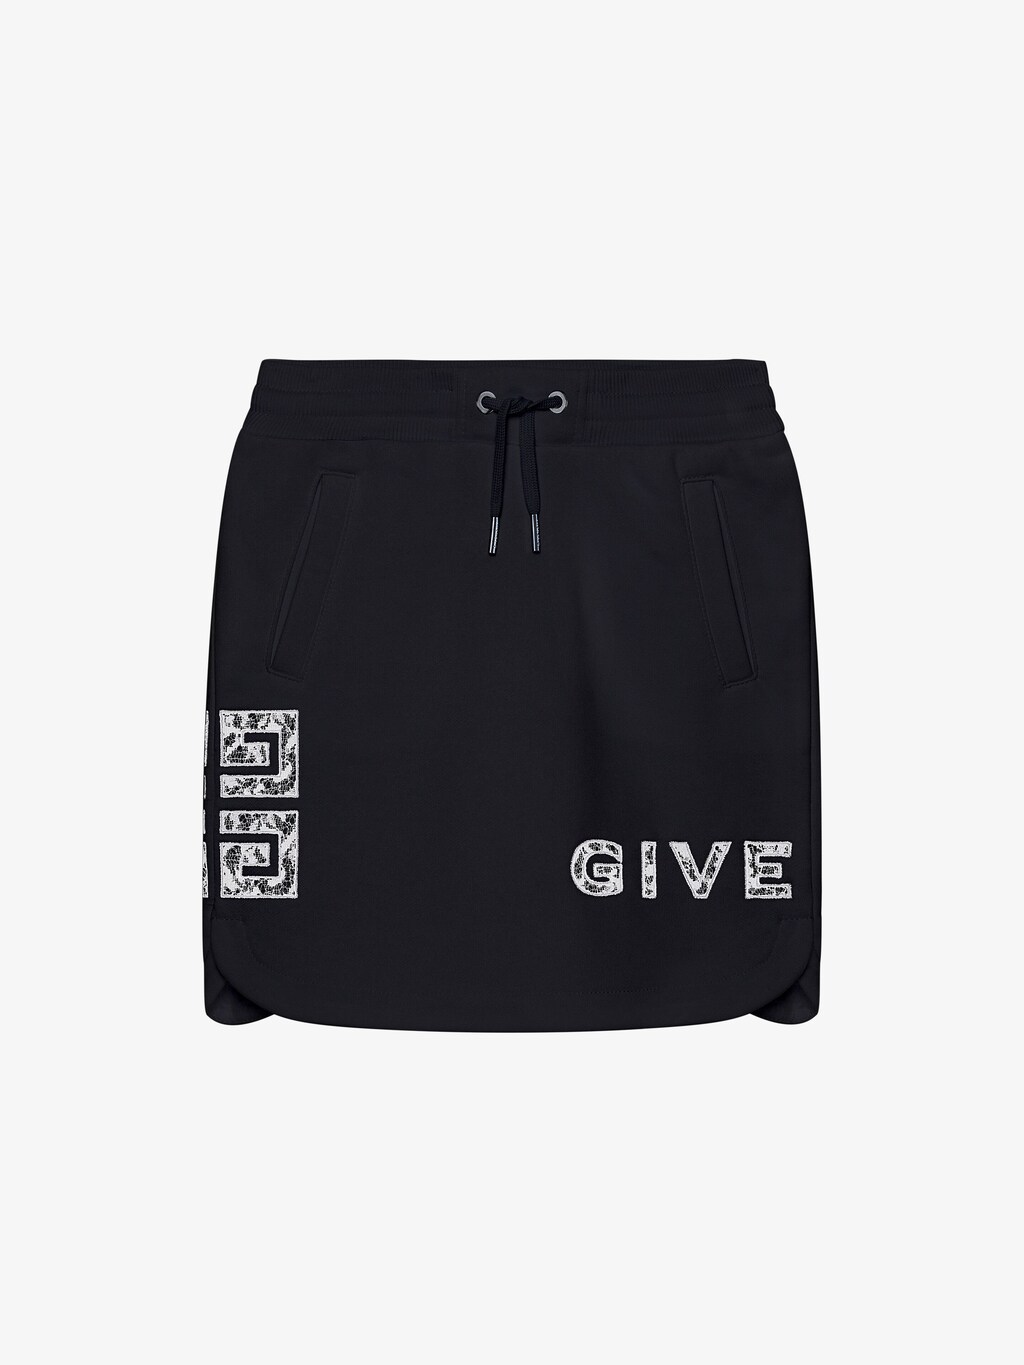 givenchy.com | Skirt in duffle with GIVENCHY 4G embroidery